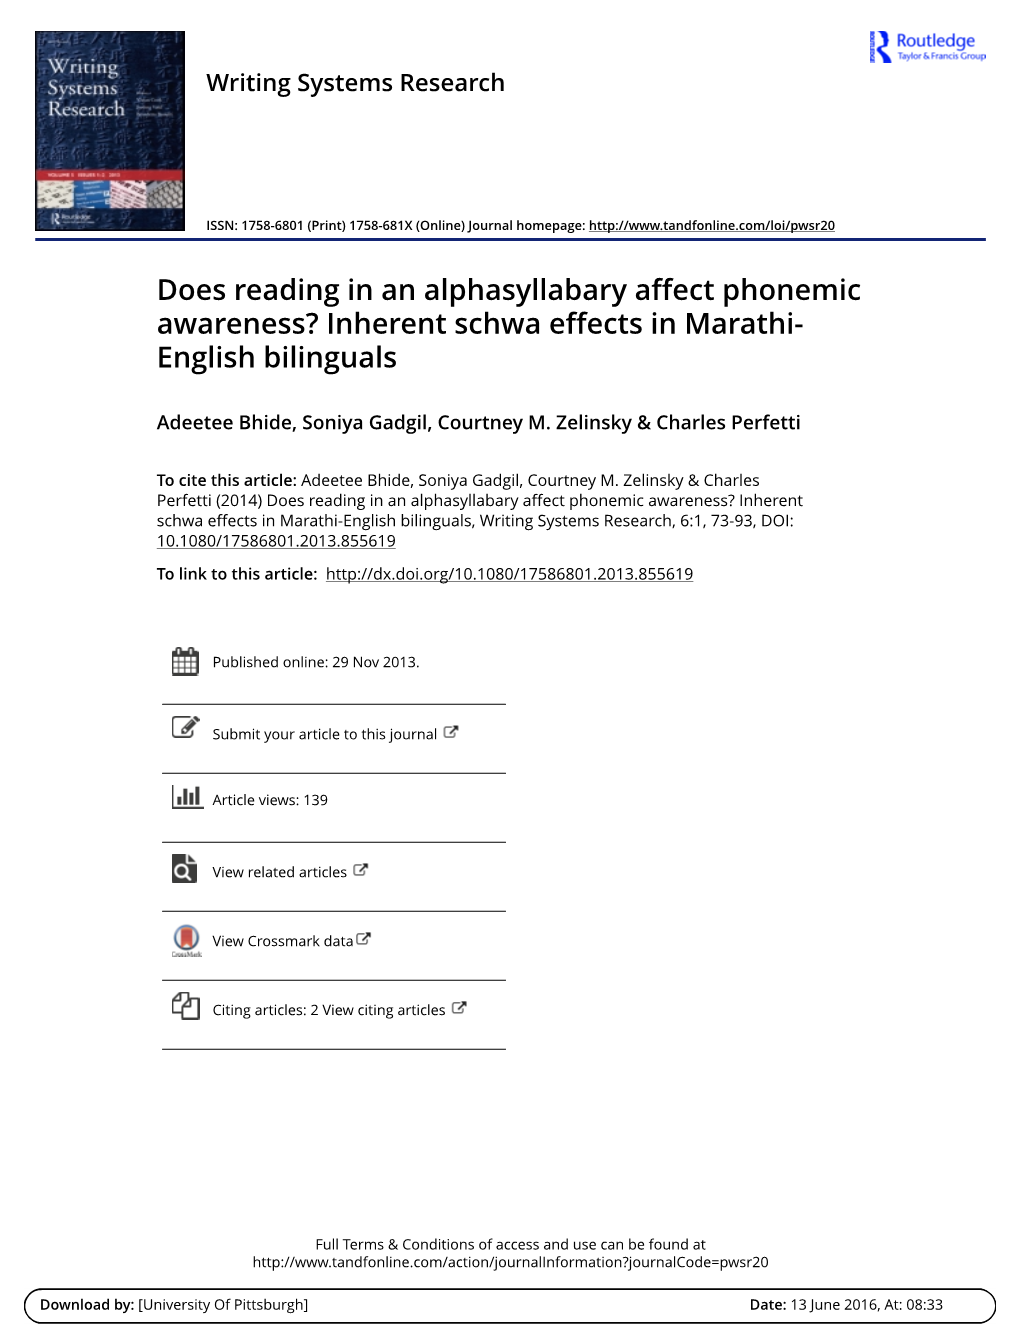 Does Reading in an Alphasyllabary Affect Phonemic Awareness? Inherent Schwa Effects in Marathi- English Bilinguals